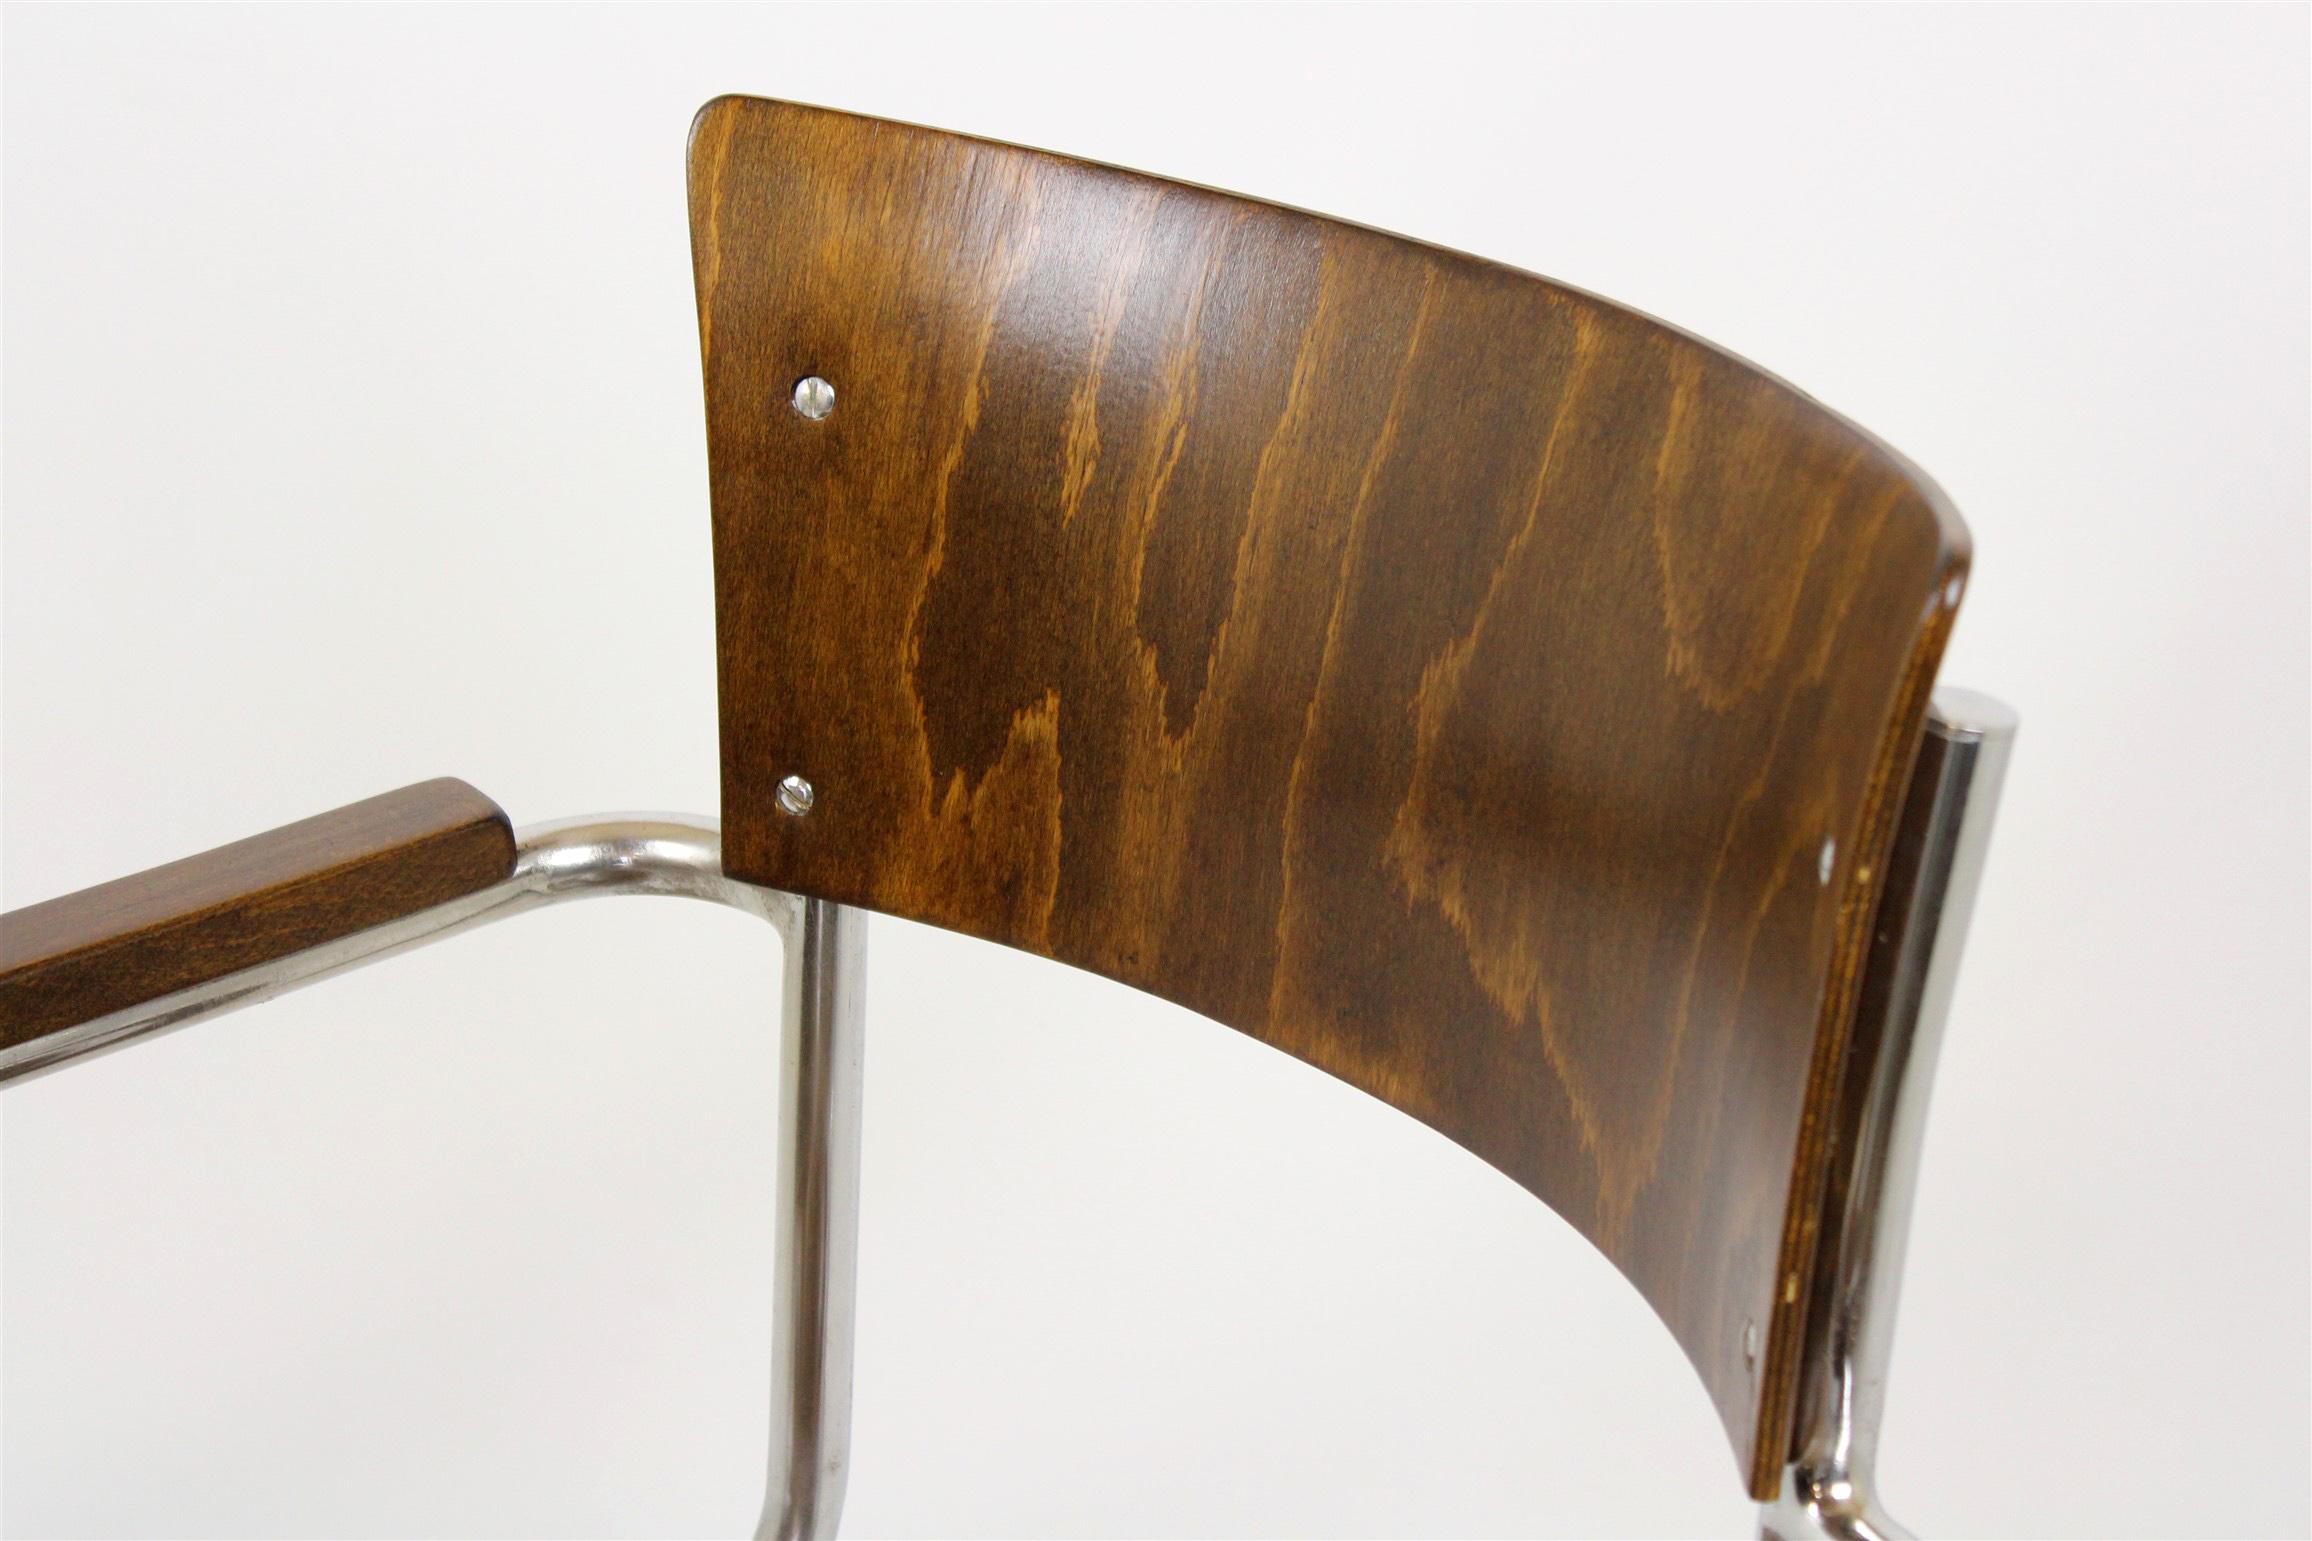 Fn 6 Cantilever Chair by Mart Stam for Mücke-Melder, 1930s For Sale 5